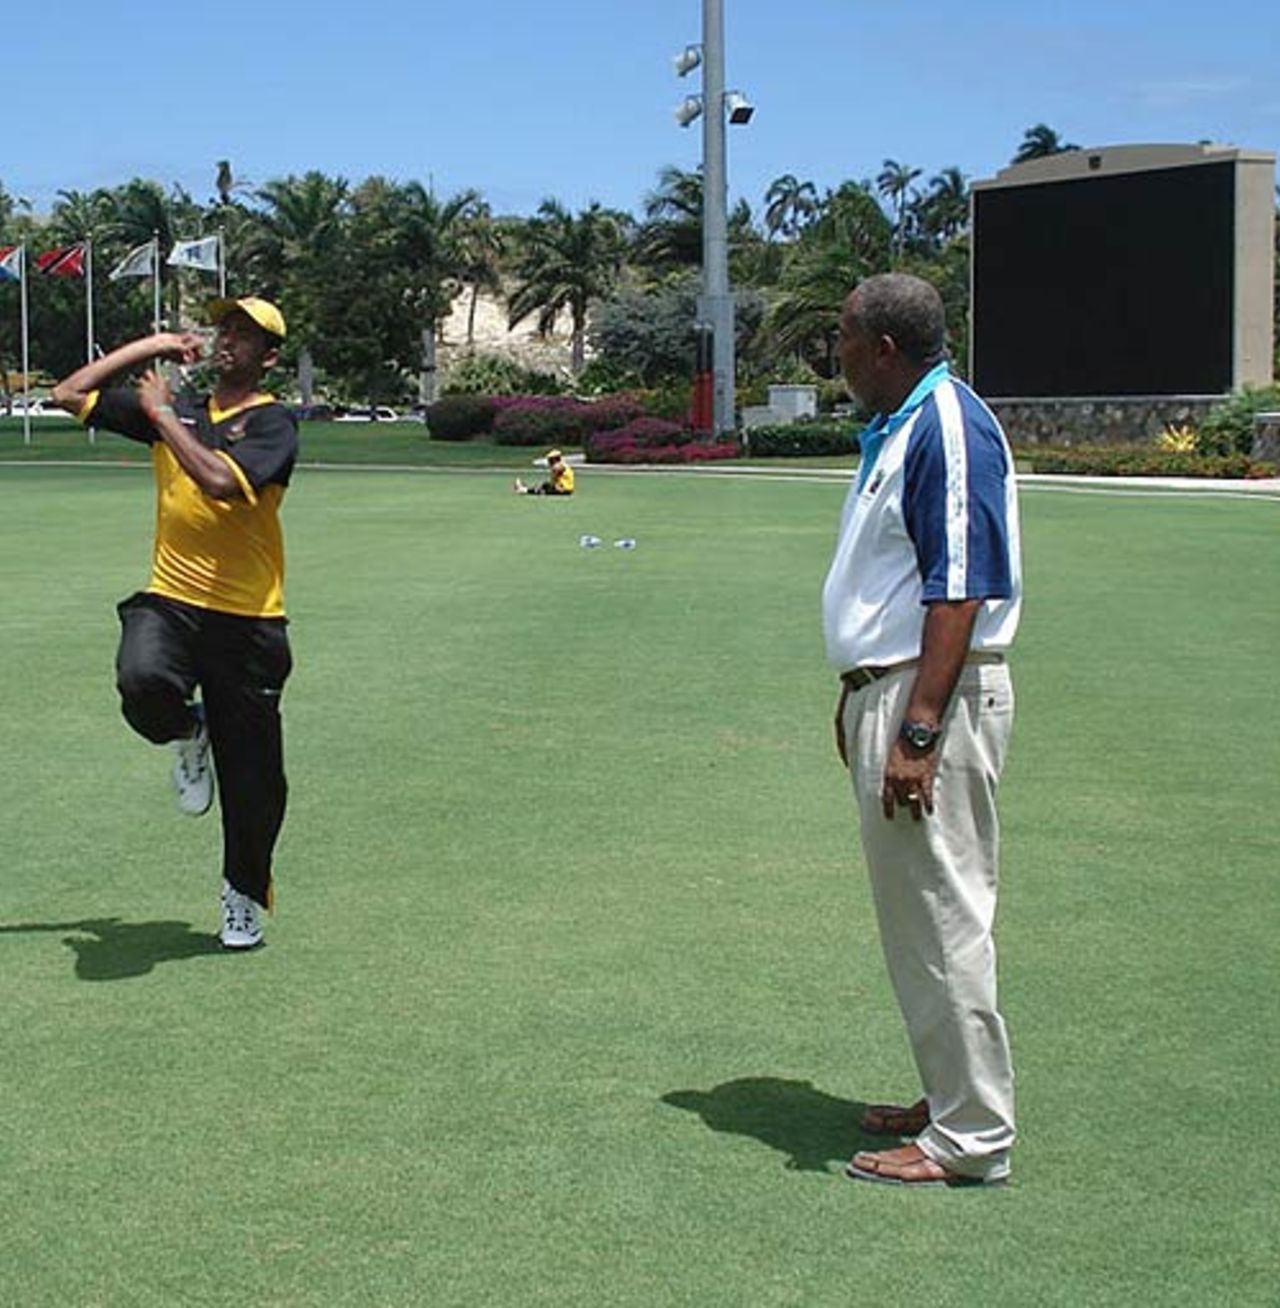 Andy Roberts helps Shahadat Hossain with his action at the Stanford Cricket Ground, Antigua, March 28, 2007